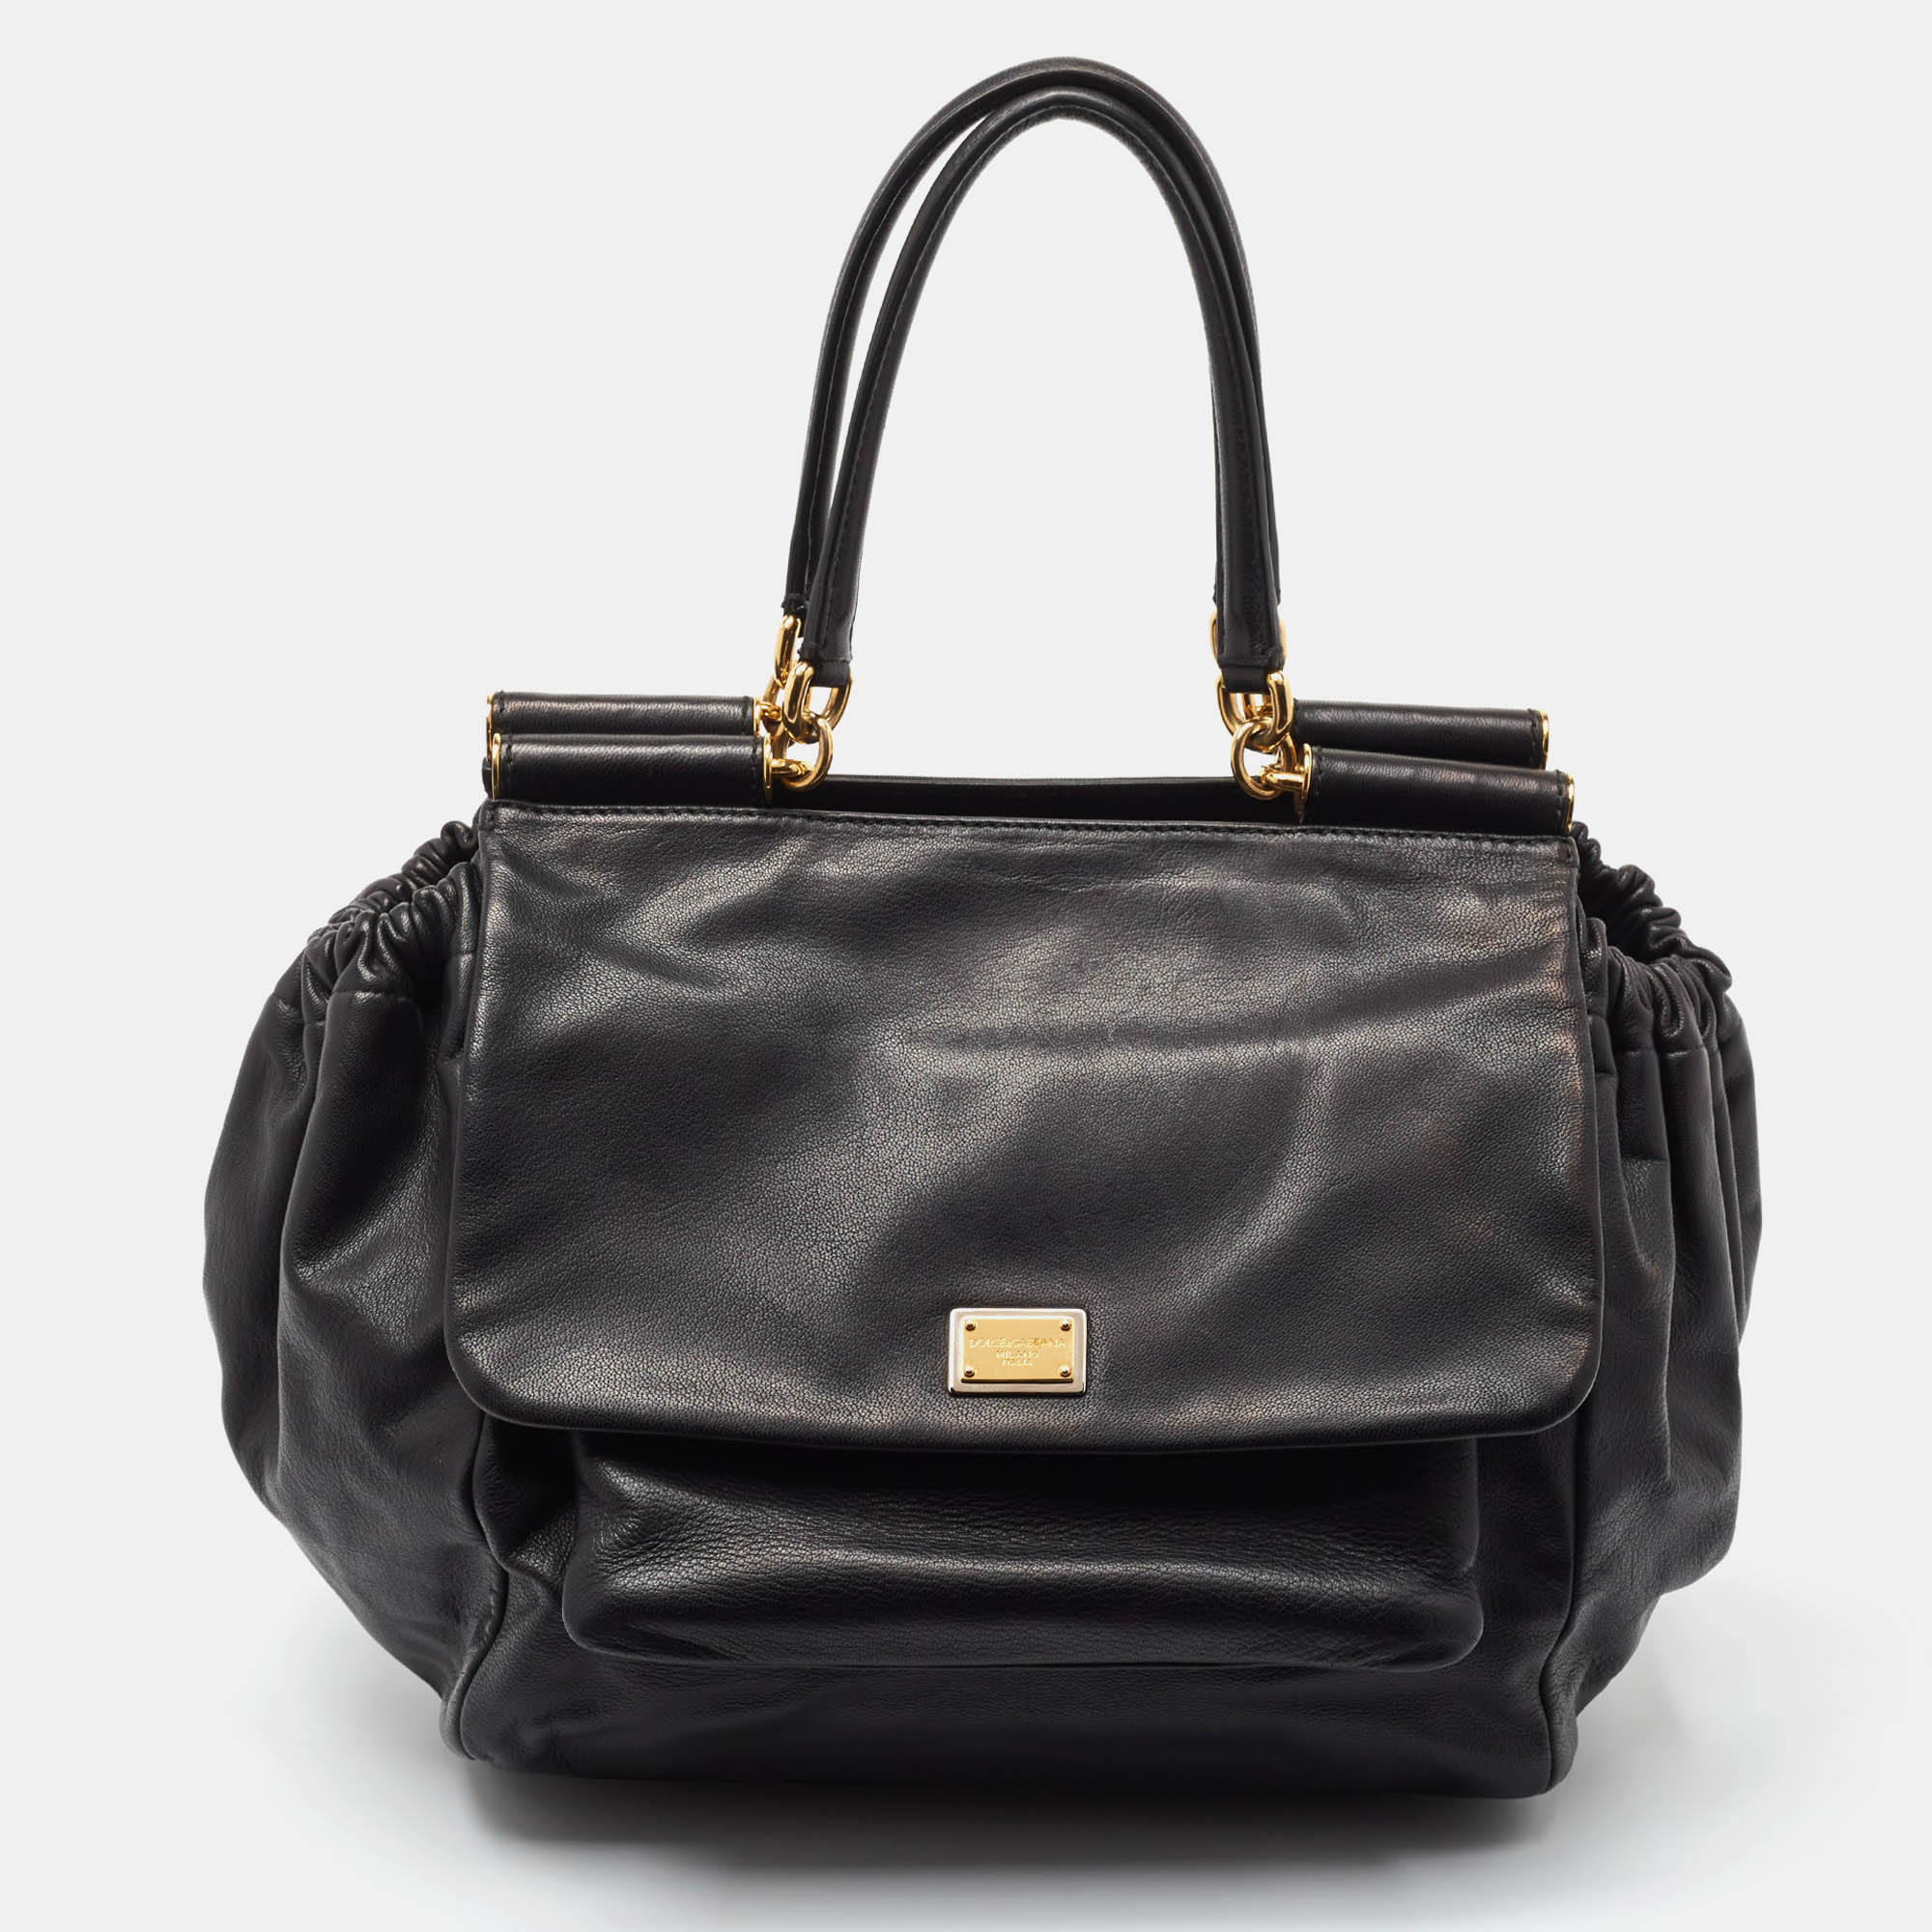 Pre-owned Dolce & Gabbana Black Leather Miss Sicily Tote